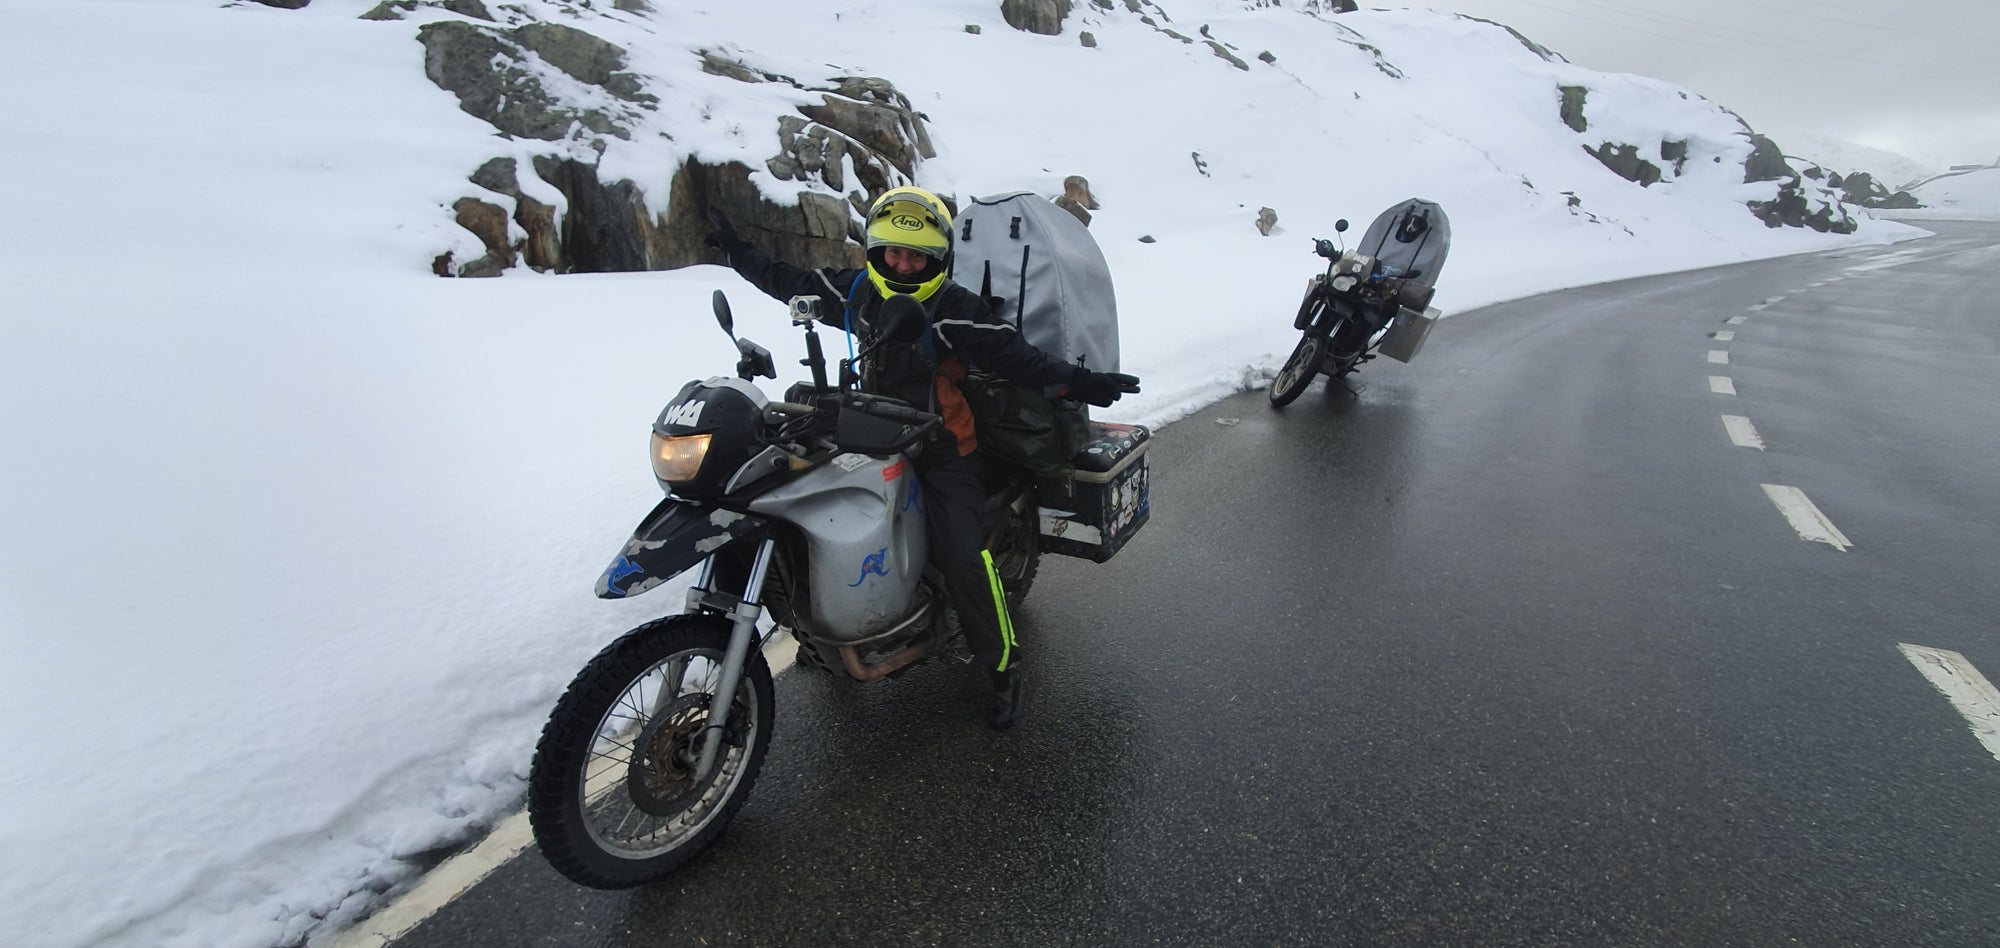 Early October The Pack Track managed to cross one of the few passes still open in Switzerland, the Grimsel Pass at 2164m. It was freezing cold with poor visibility. Weeti and Shadow were wrapped up nice and warm in their Pillion Pooch's.